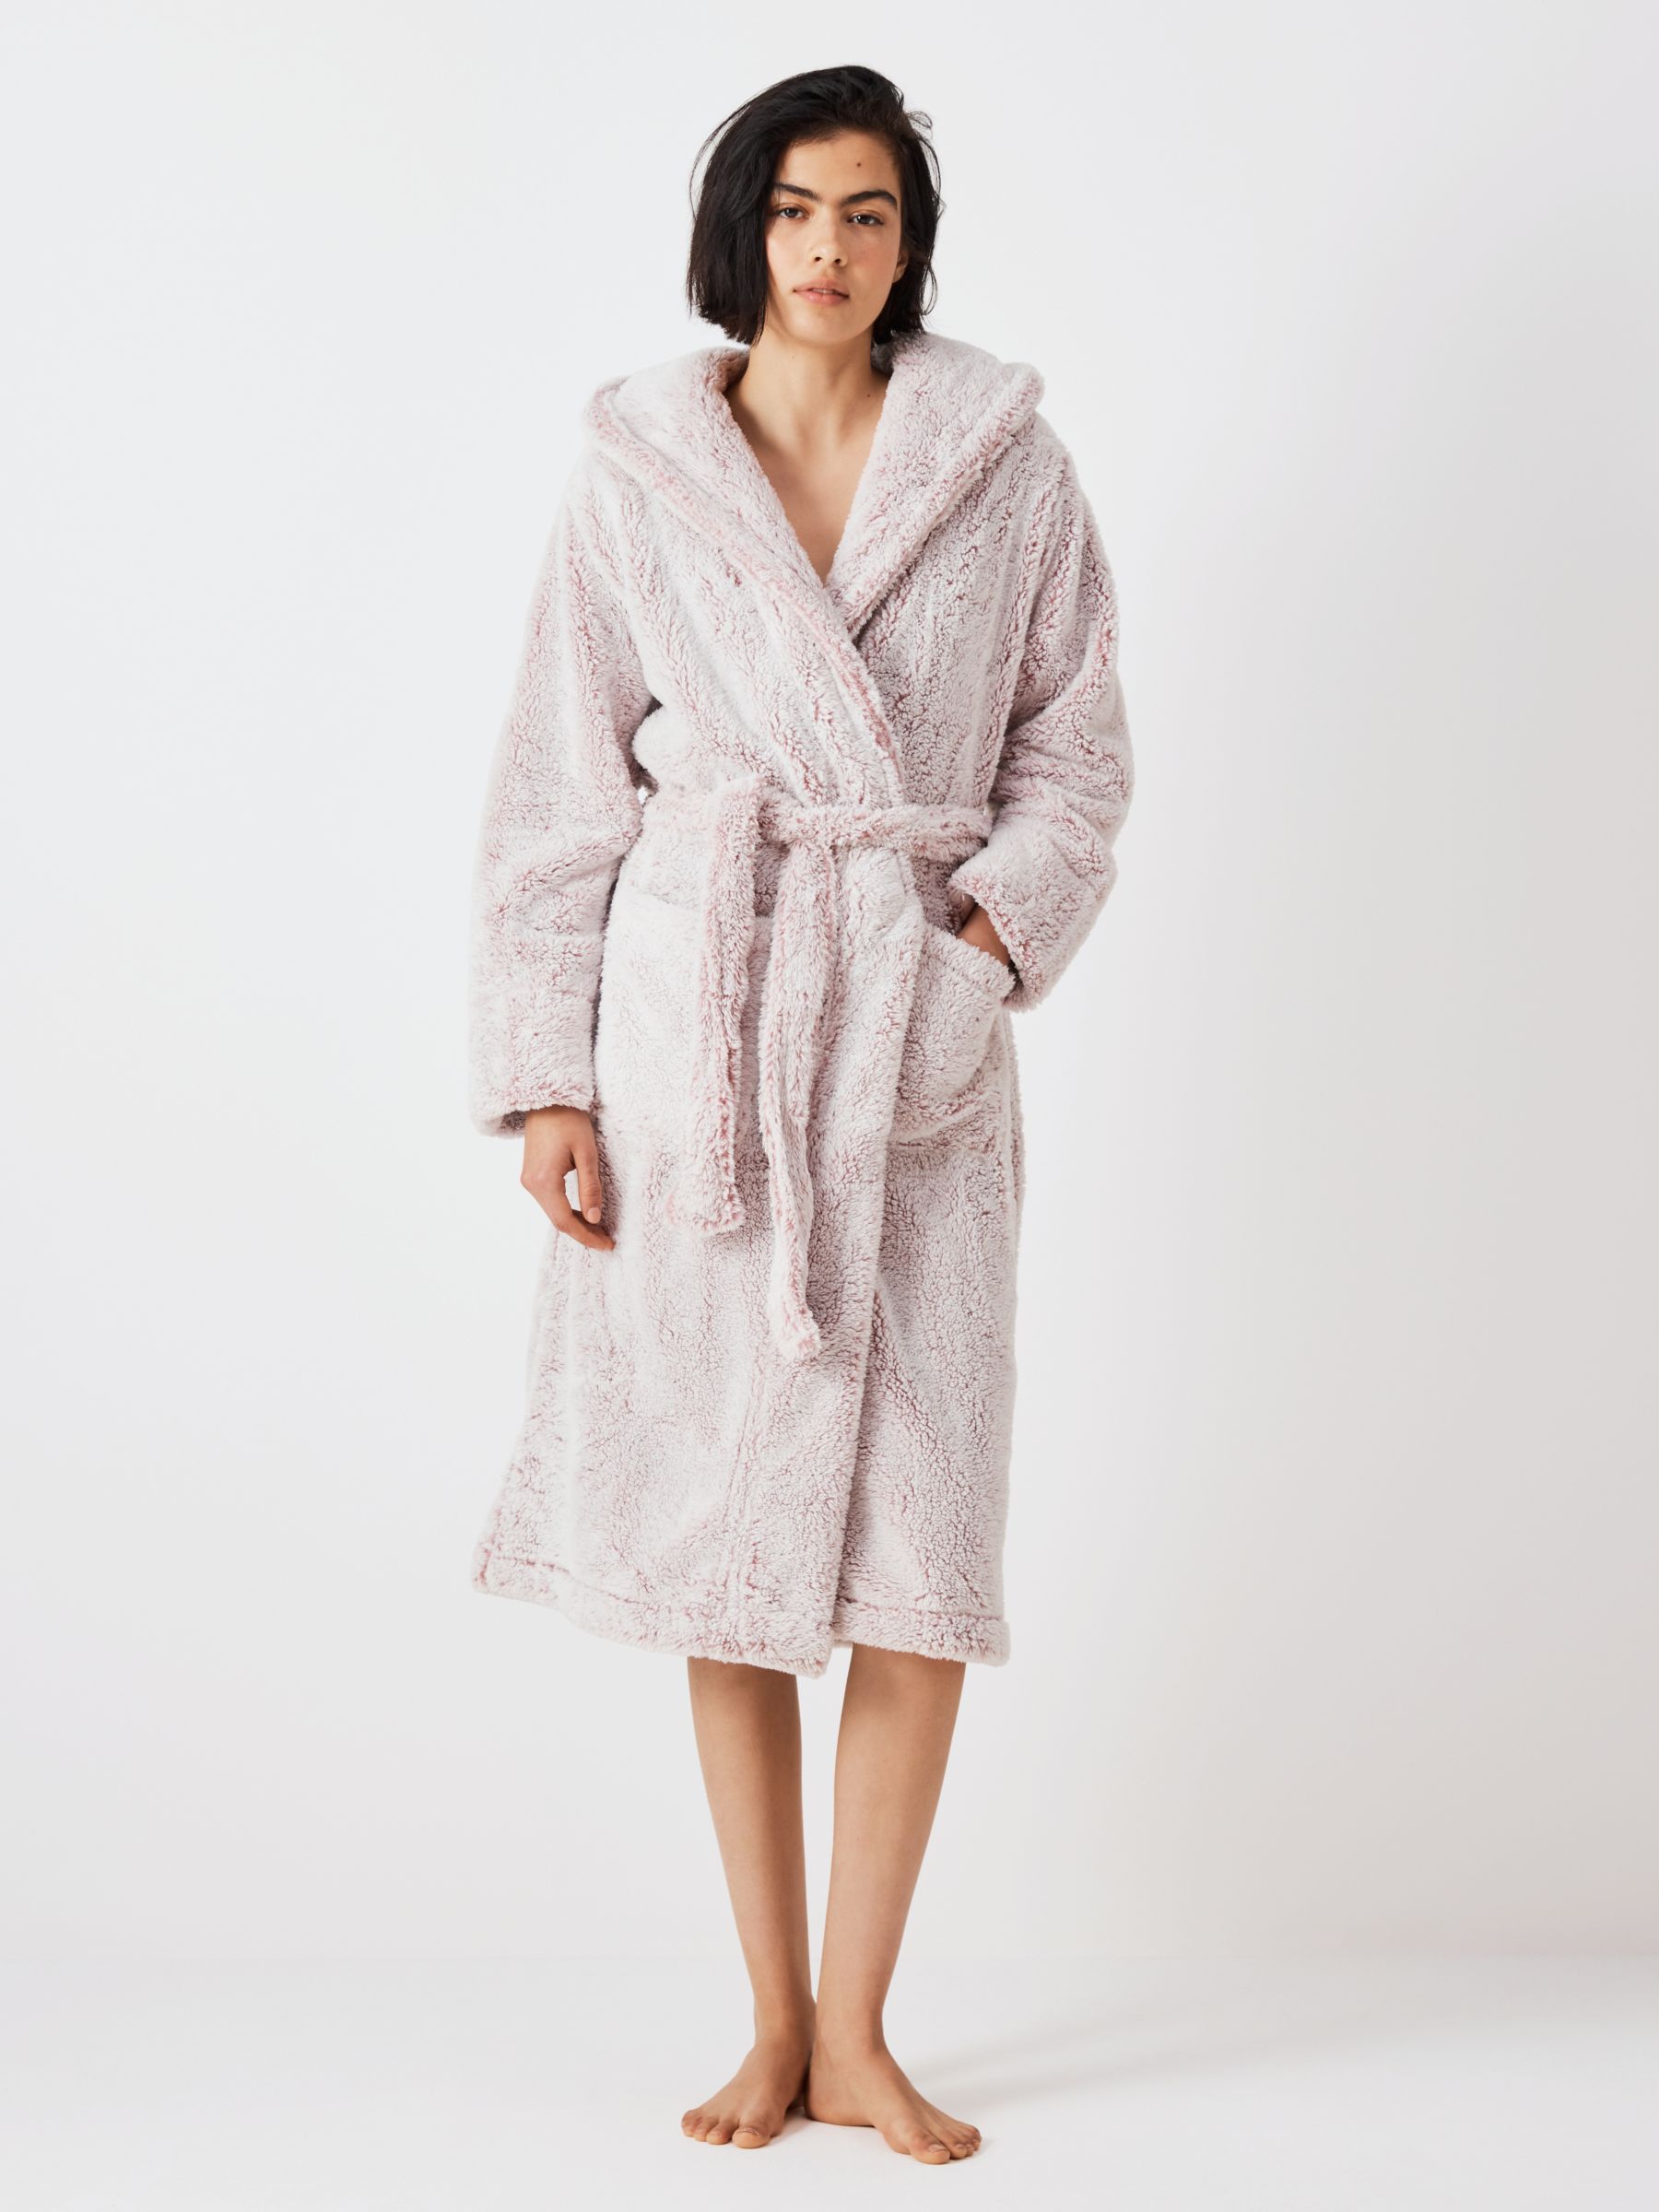 Womens Clothing Nightwear and sleepwear Robes robe dresses and bathrobes Grey Ted Baker Longline Linen Robe in Light Brown 